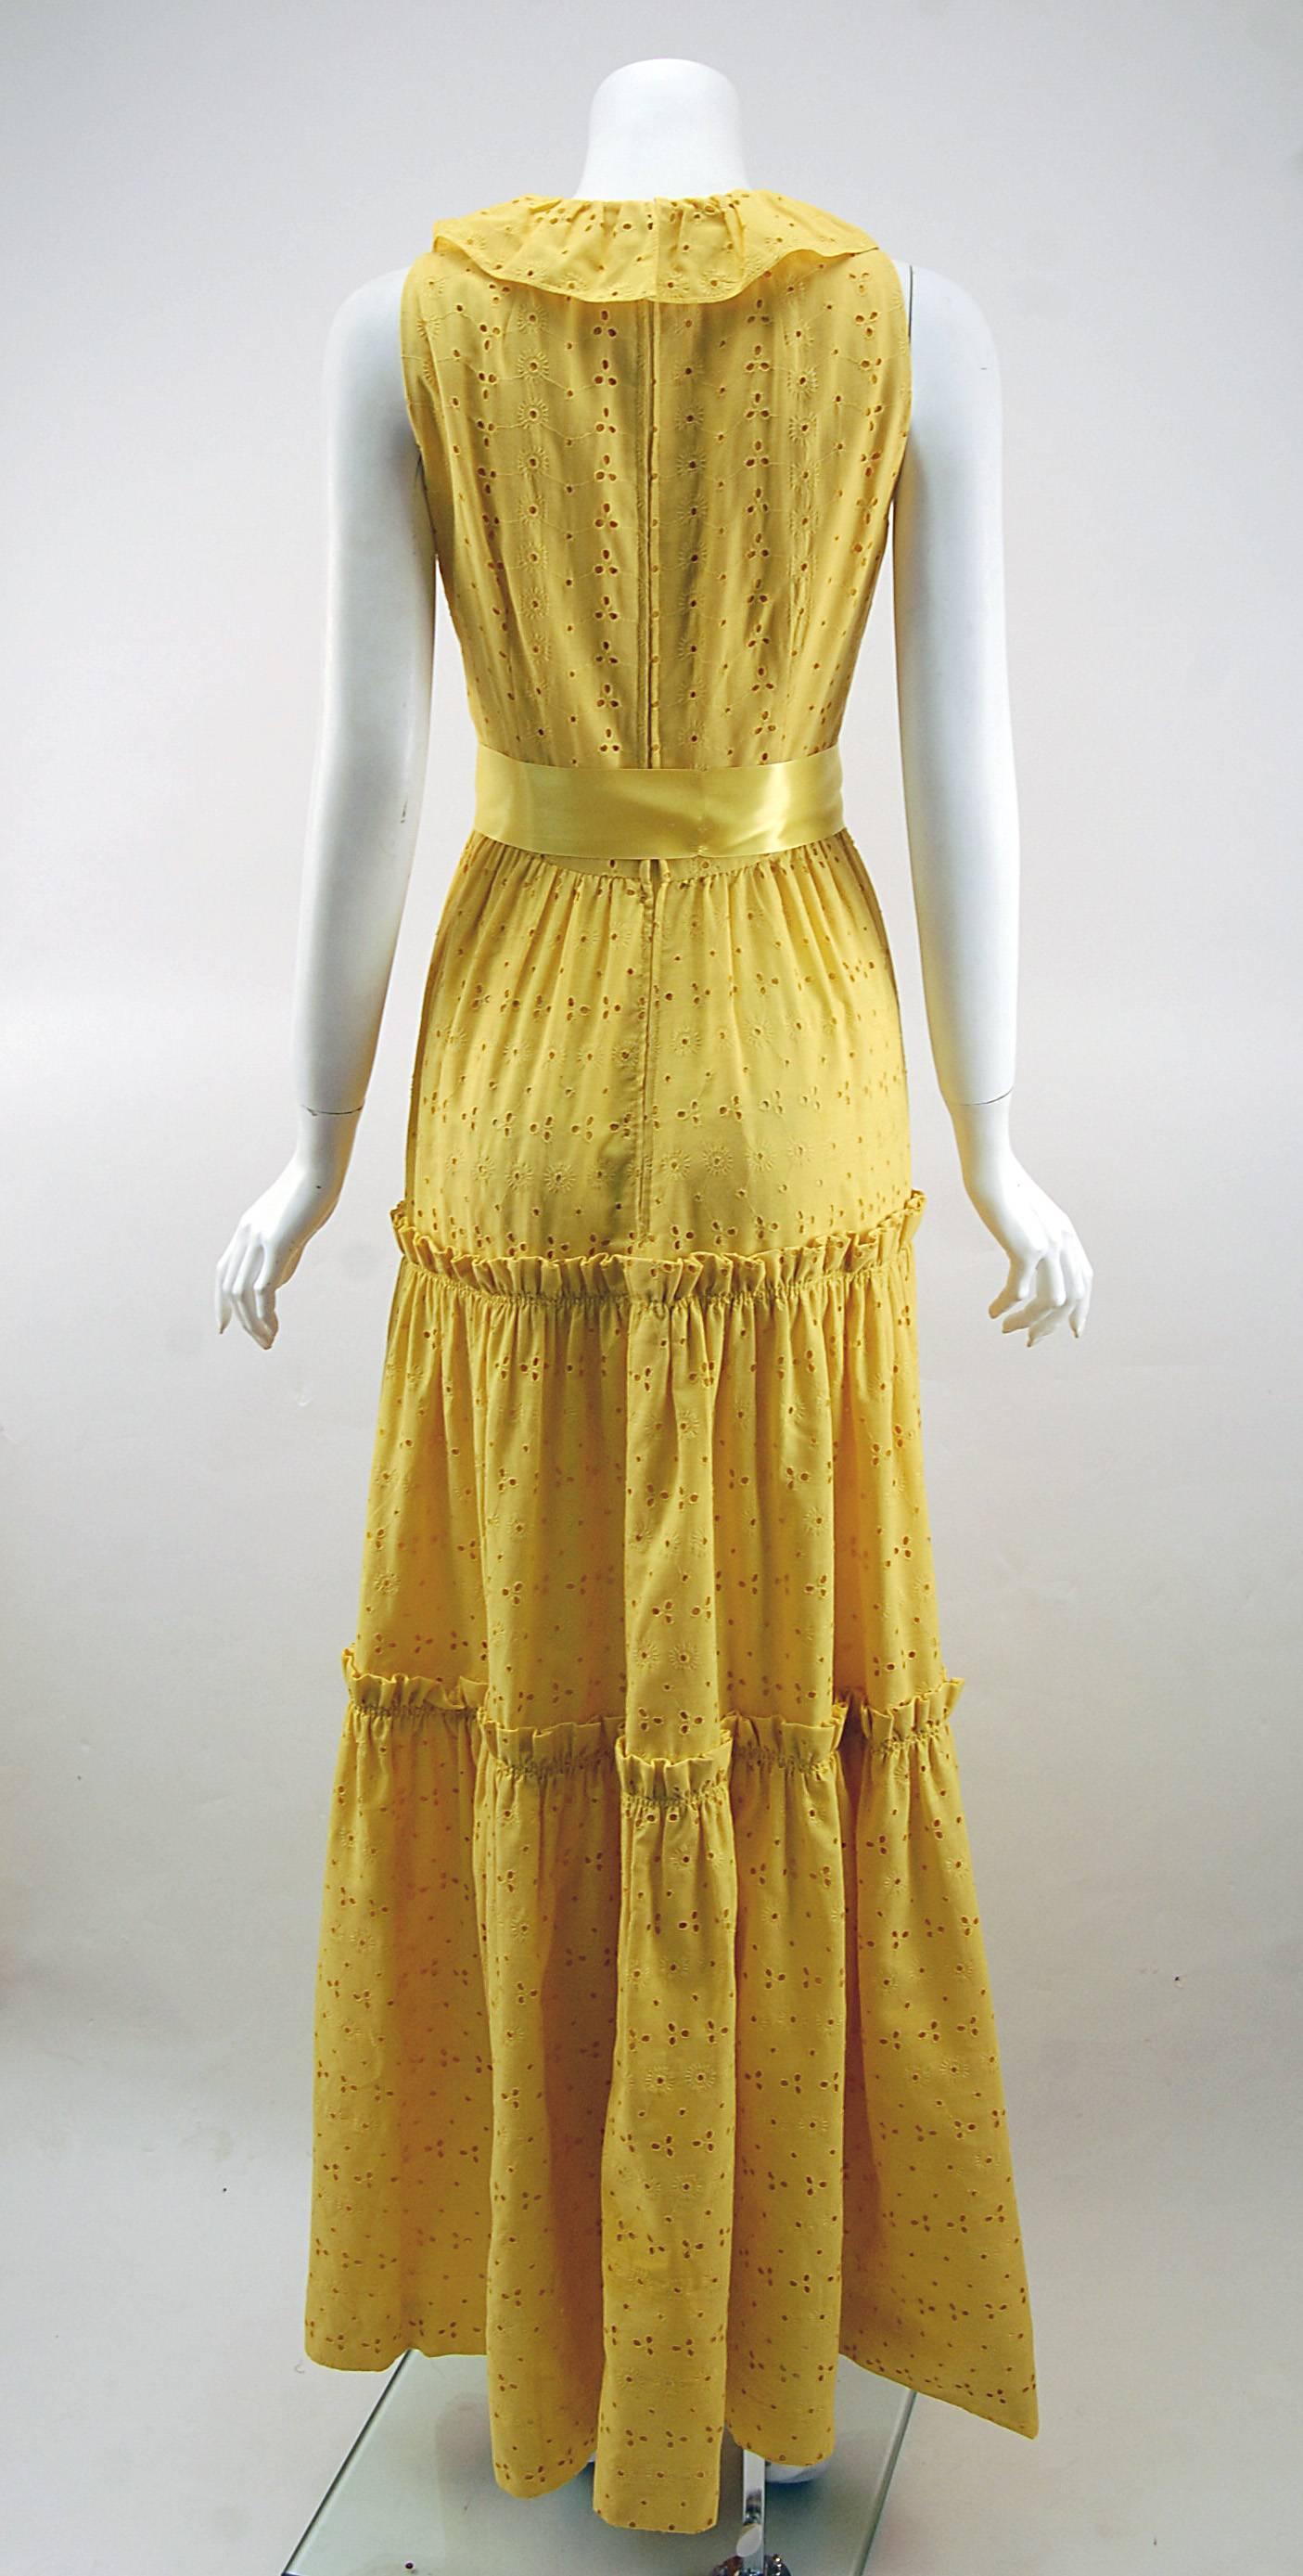 Brown 1970s Molly Parnis Summer Maxi Dress with Yellow Eyelet Lace